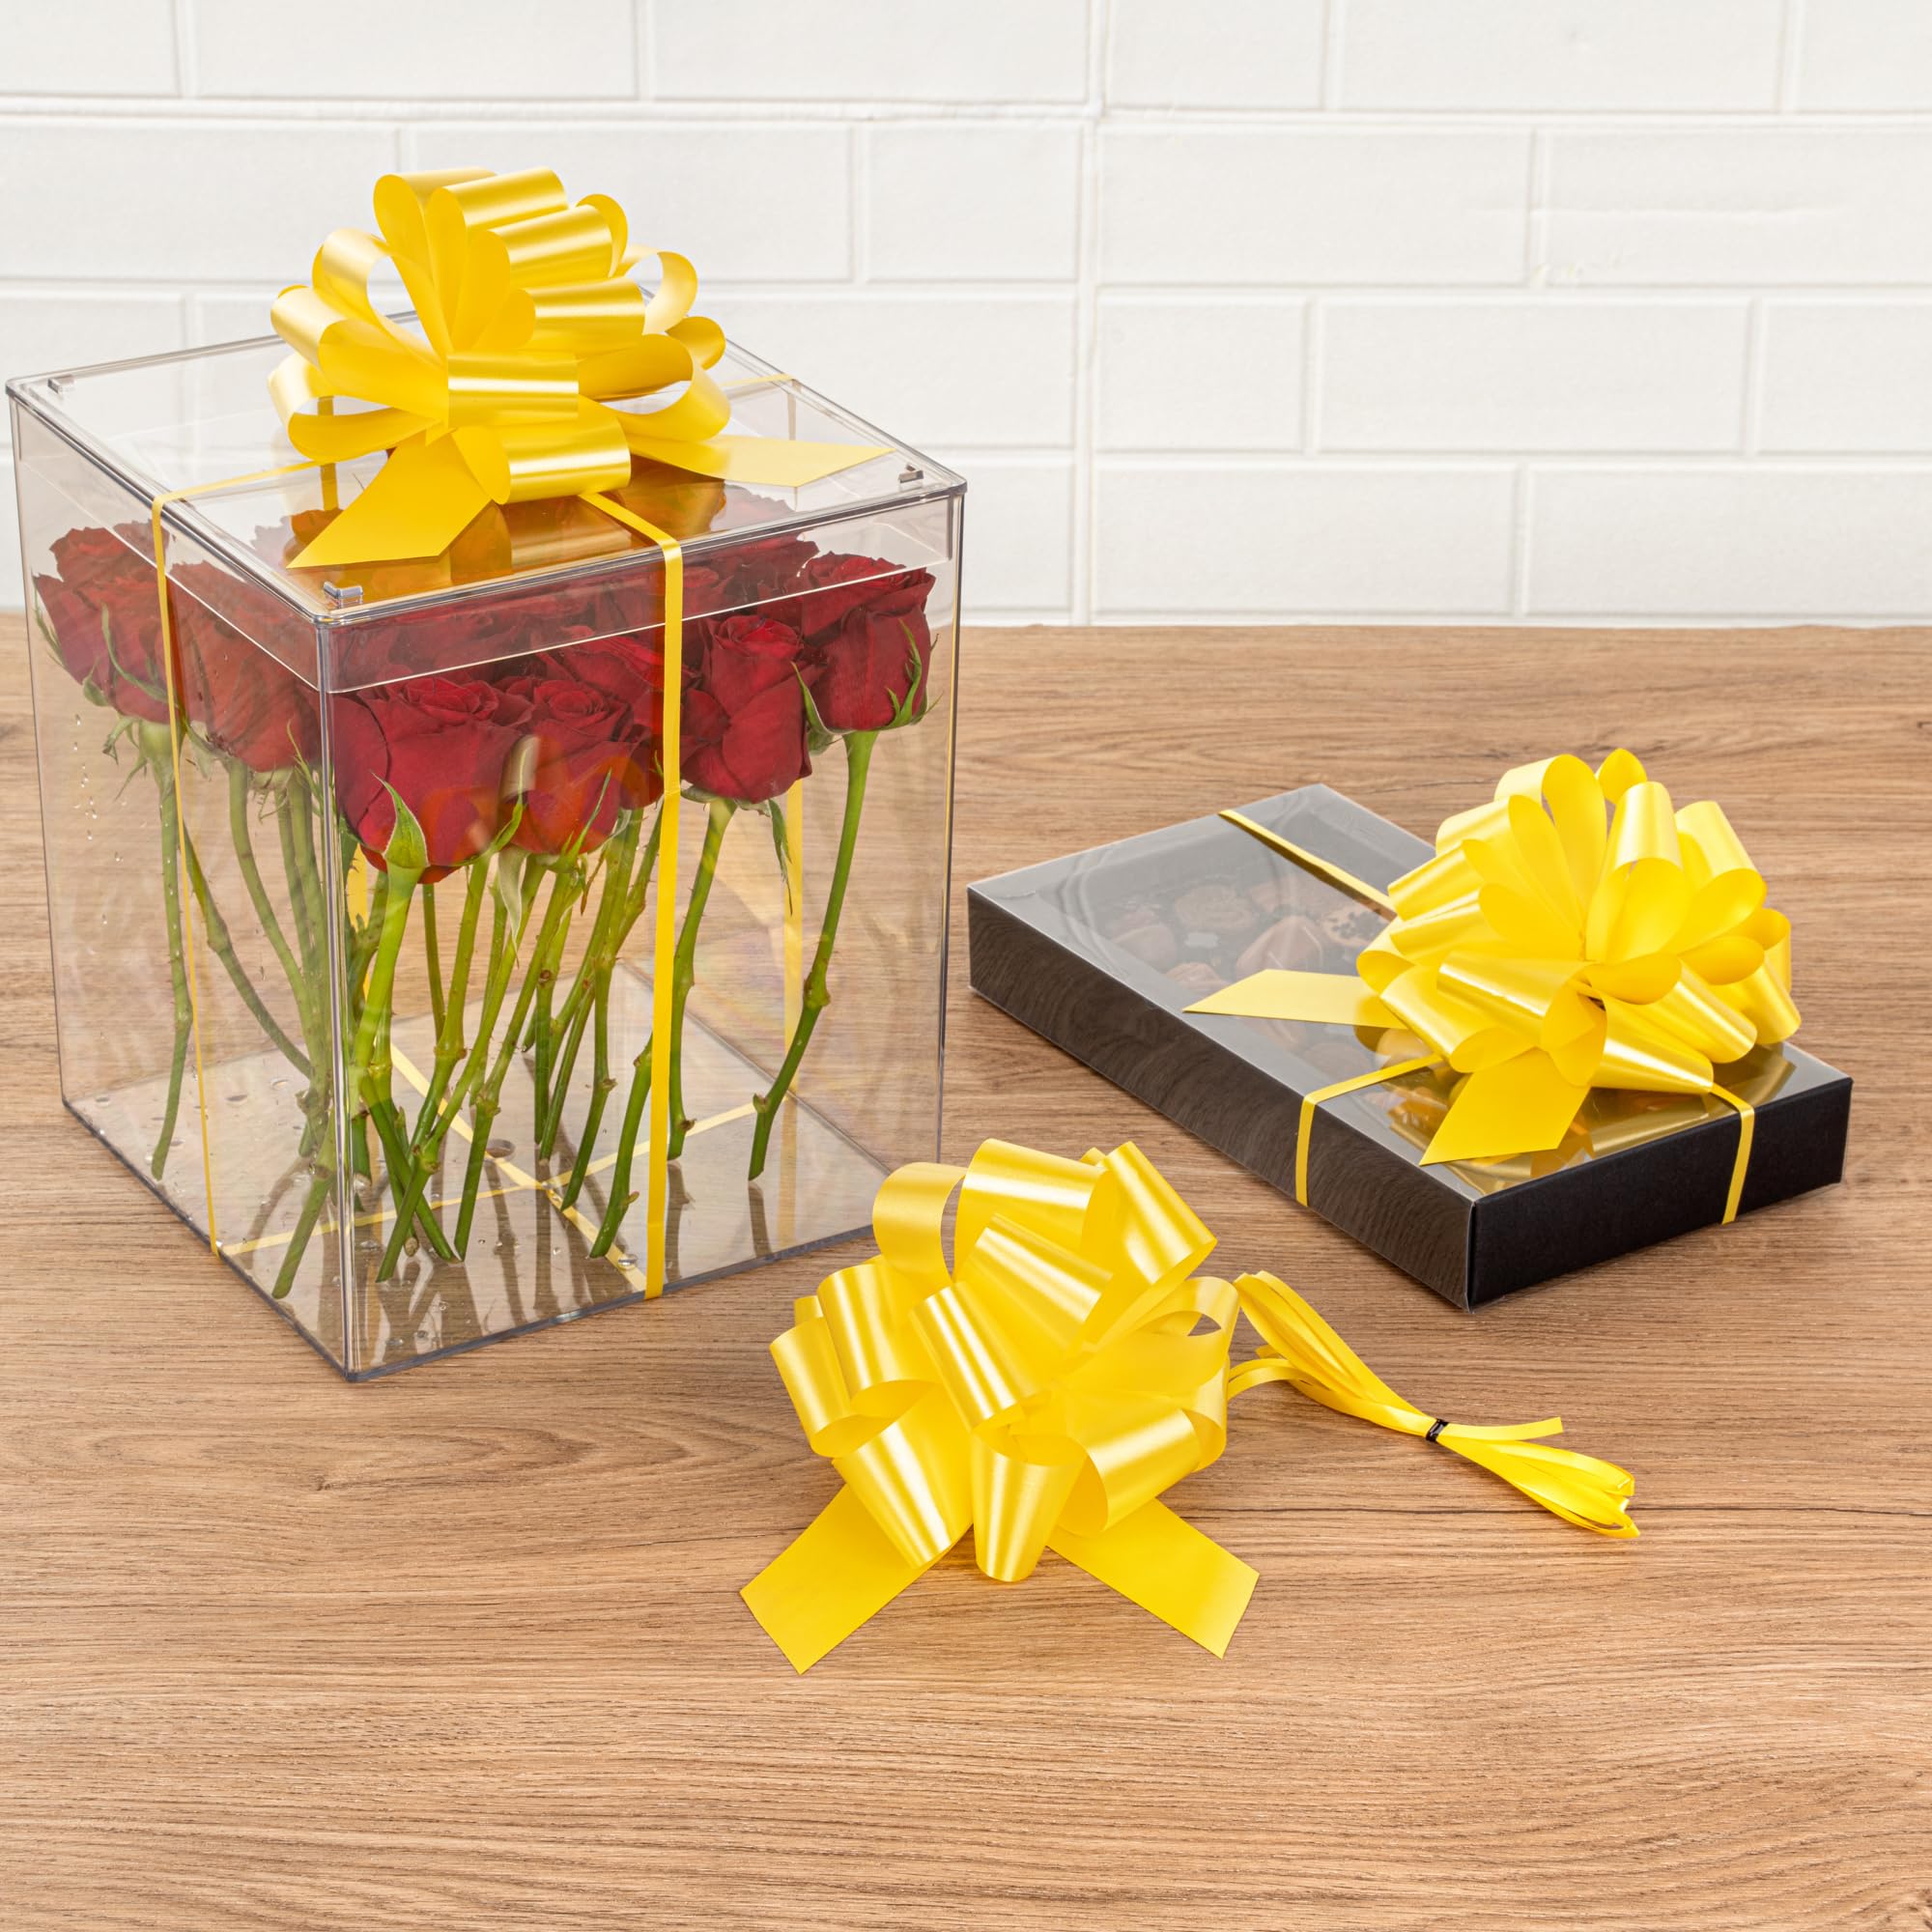 Gift Tek 5.5 Inch Ribbon Pull Bows, 1000 Satin Pull Bows - 20 Loops, Instant, Yellow Plastic Flower Bows For Gifts, Large, Solid Color, For Wedding Gift Baskets, Wraps - Restaurantware